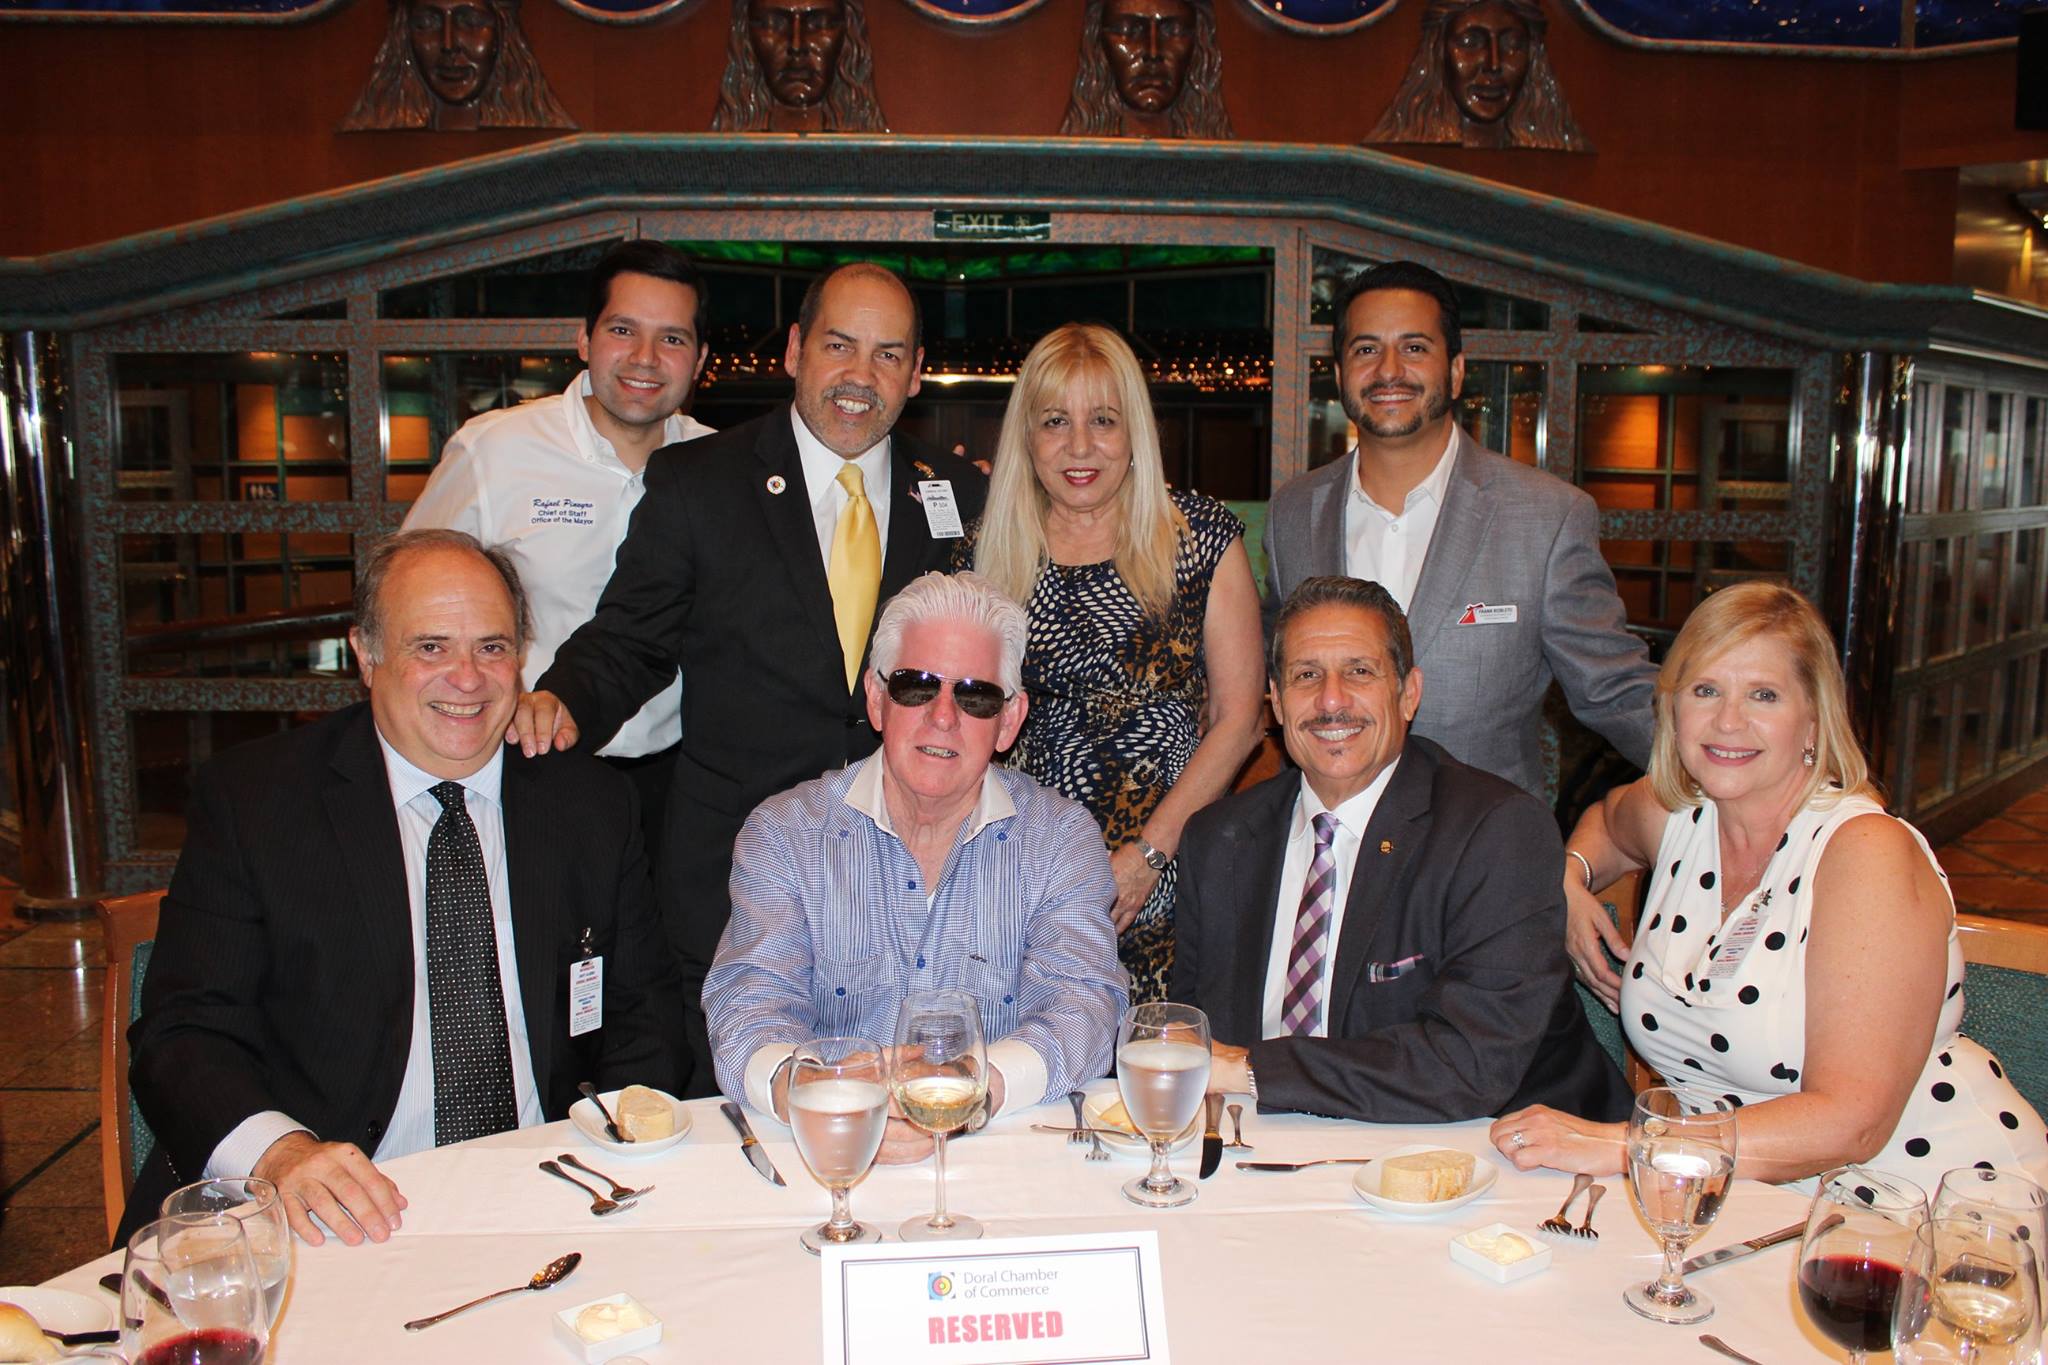 Doral Chamber of Commerce Carnival Cruise event.